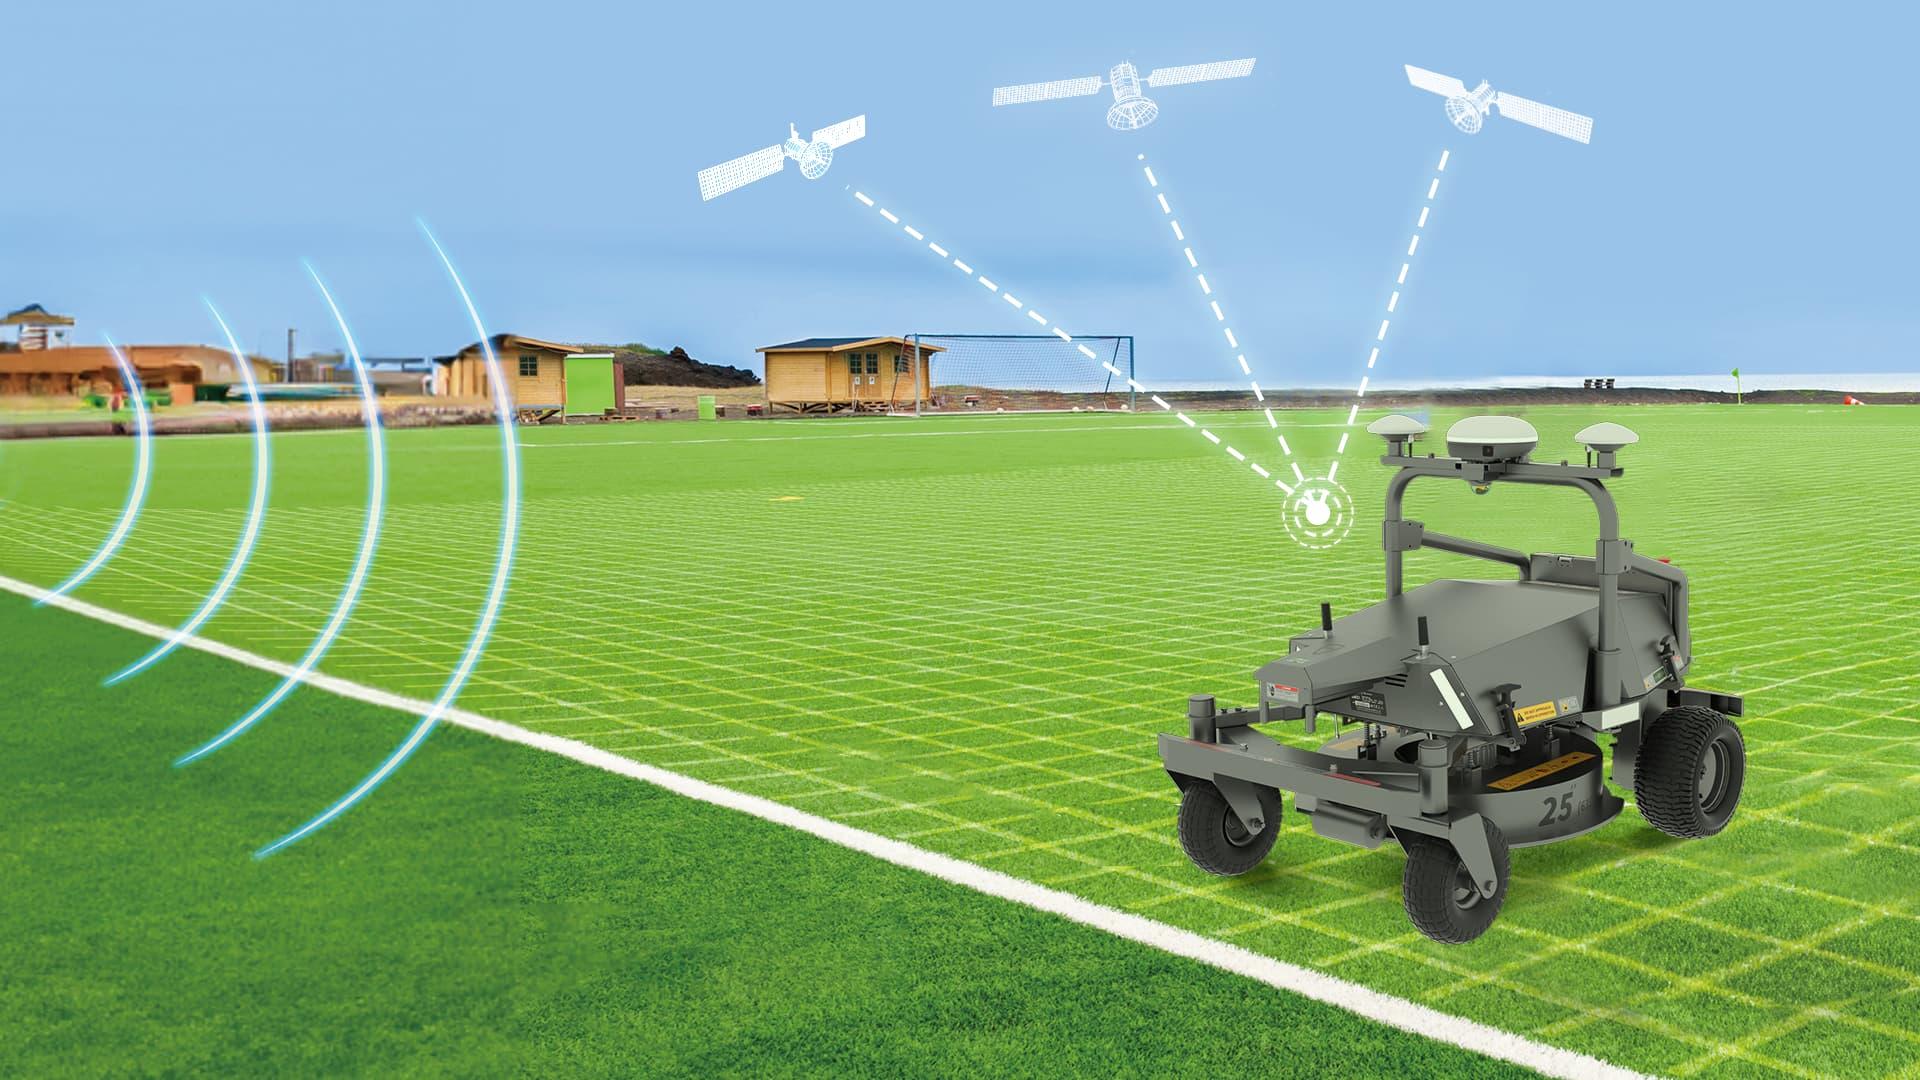  With centimeter-level positioning accuracy, our mowers can precisely cut grass, reducing the need for overlap or missed areas. This results in faster and more efficient mowing.